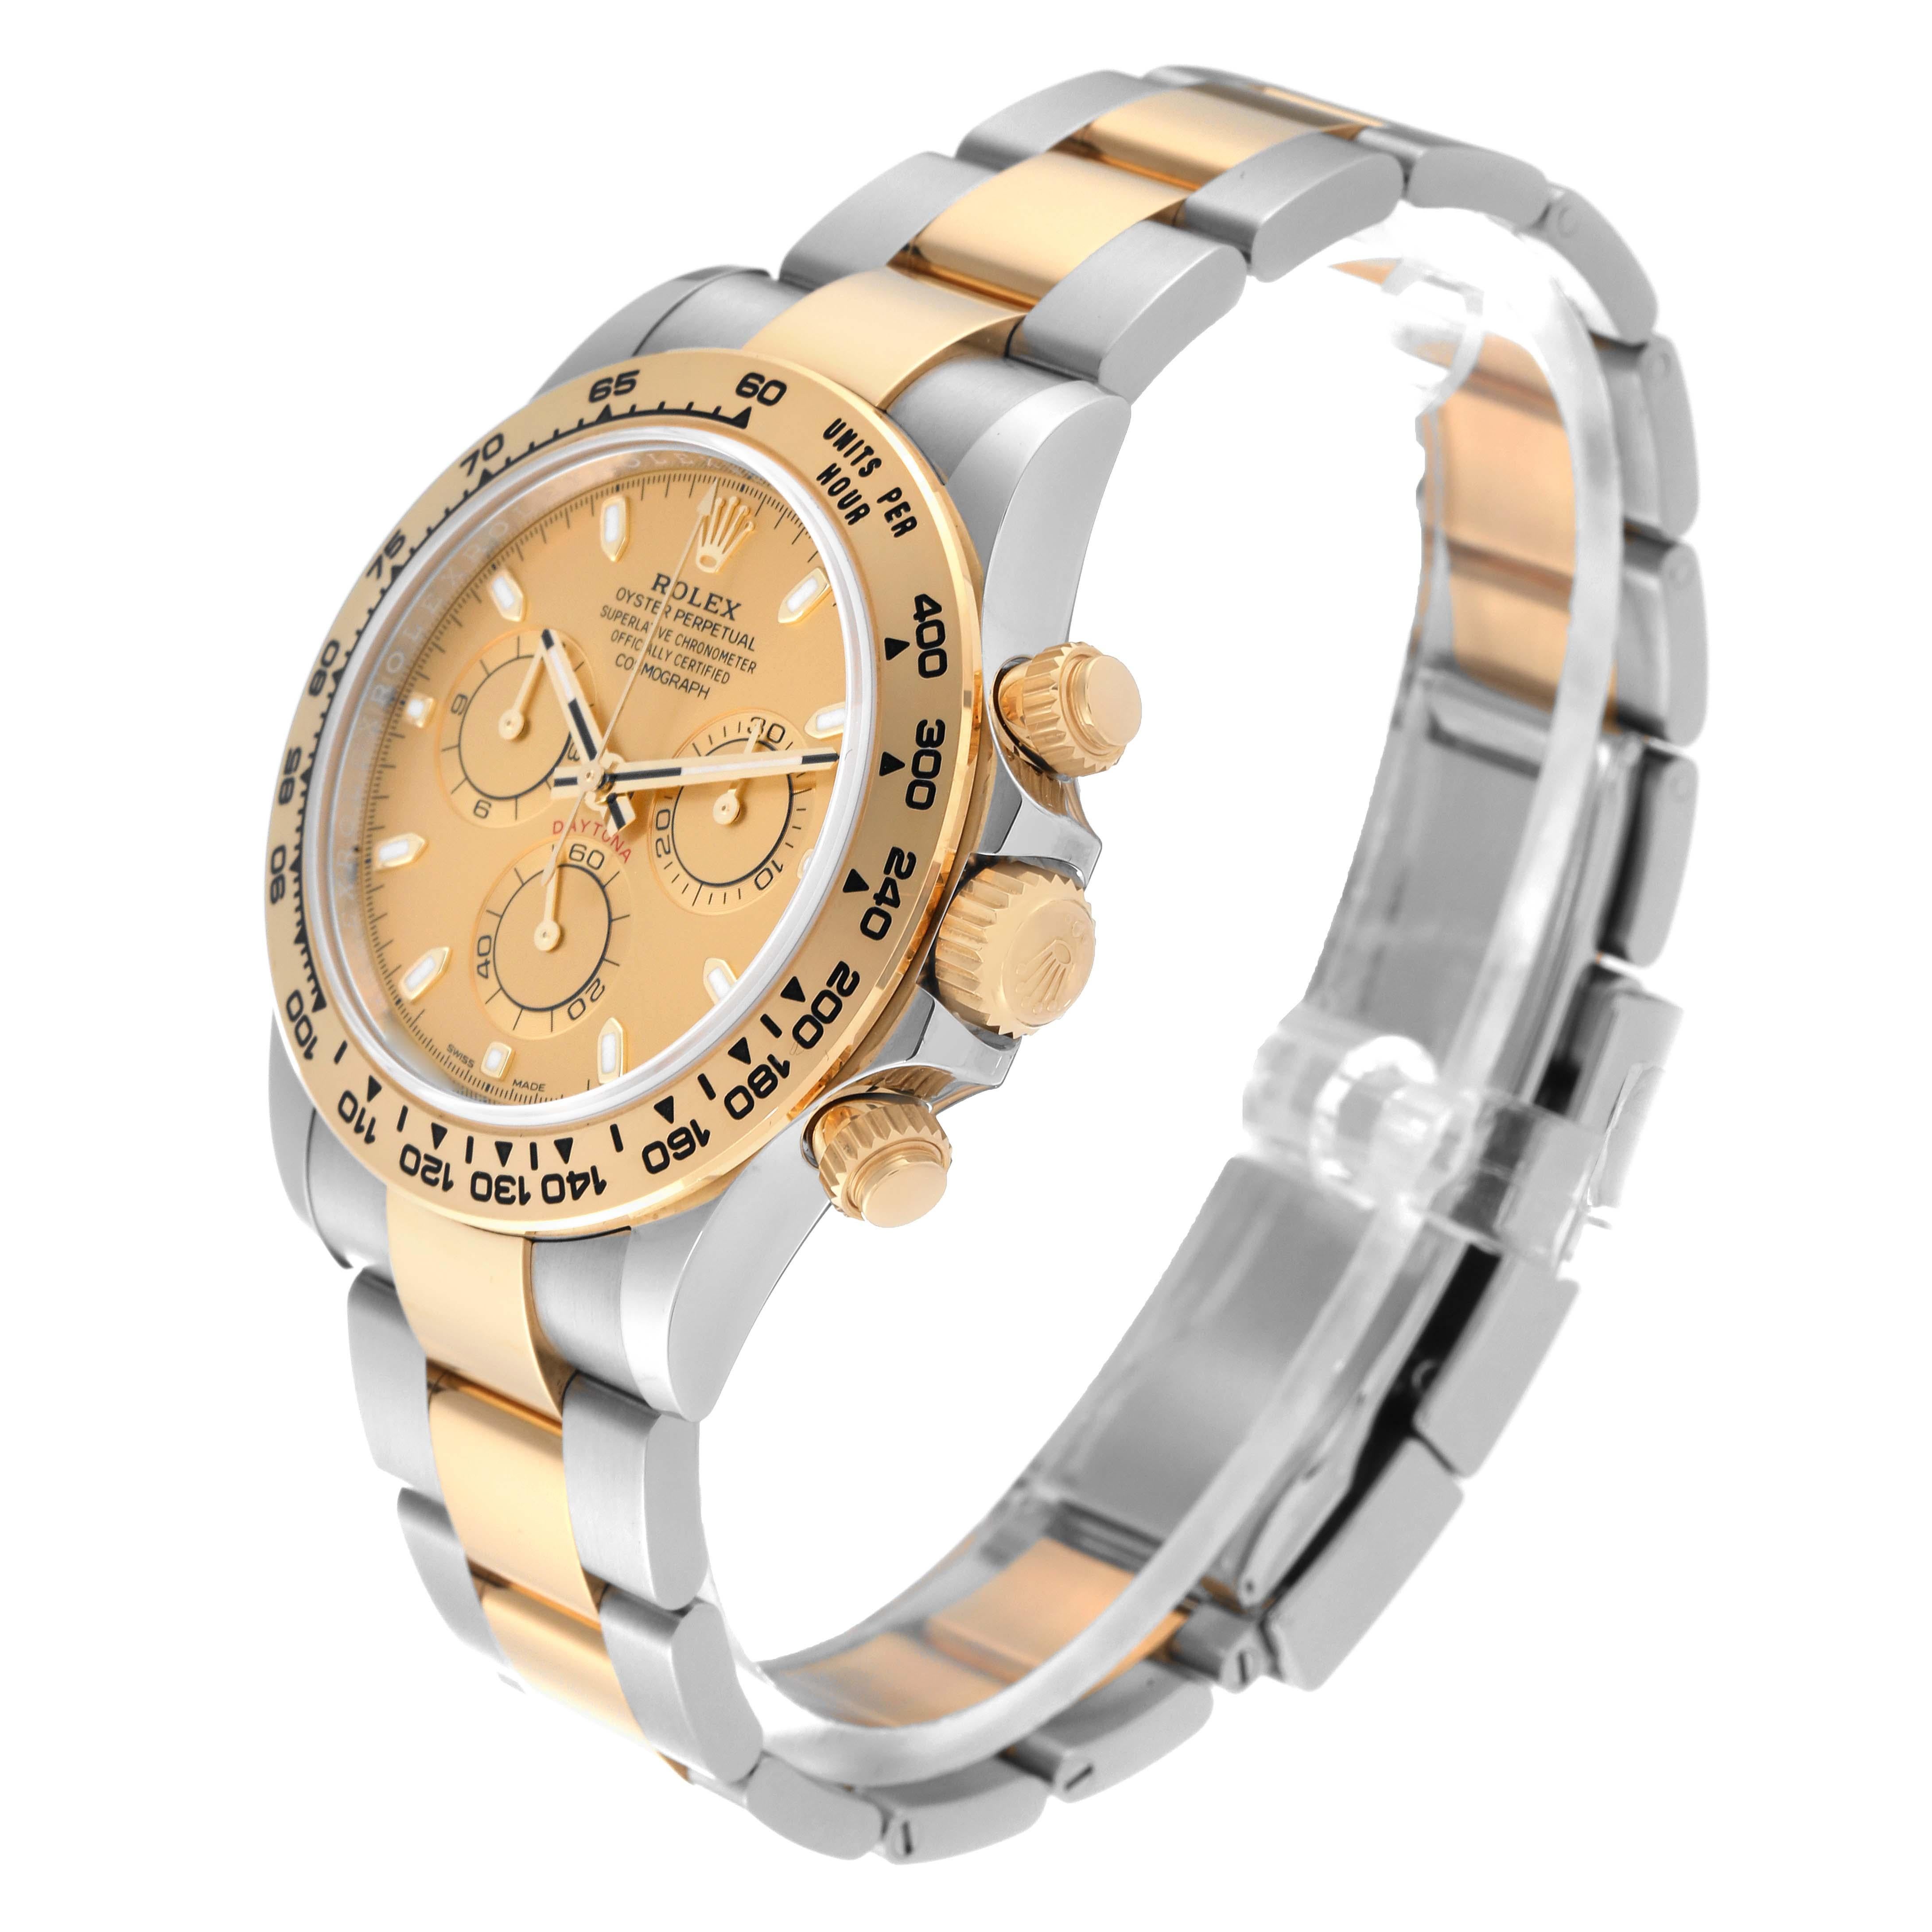 Rolex Daytona Champagne Dial Steel Yellow Gold Mens Watch 116503 Box Card For Sale 1